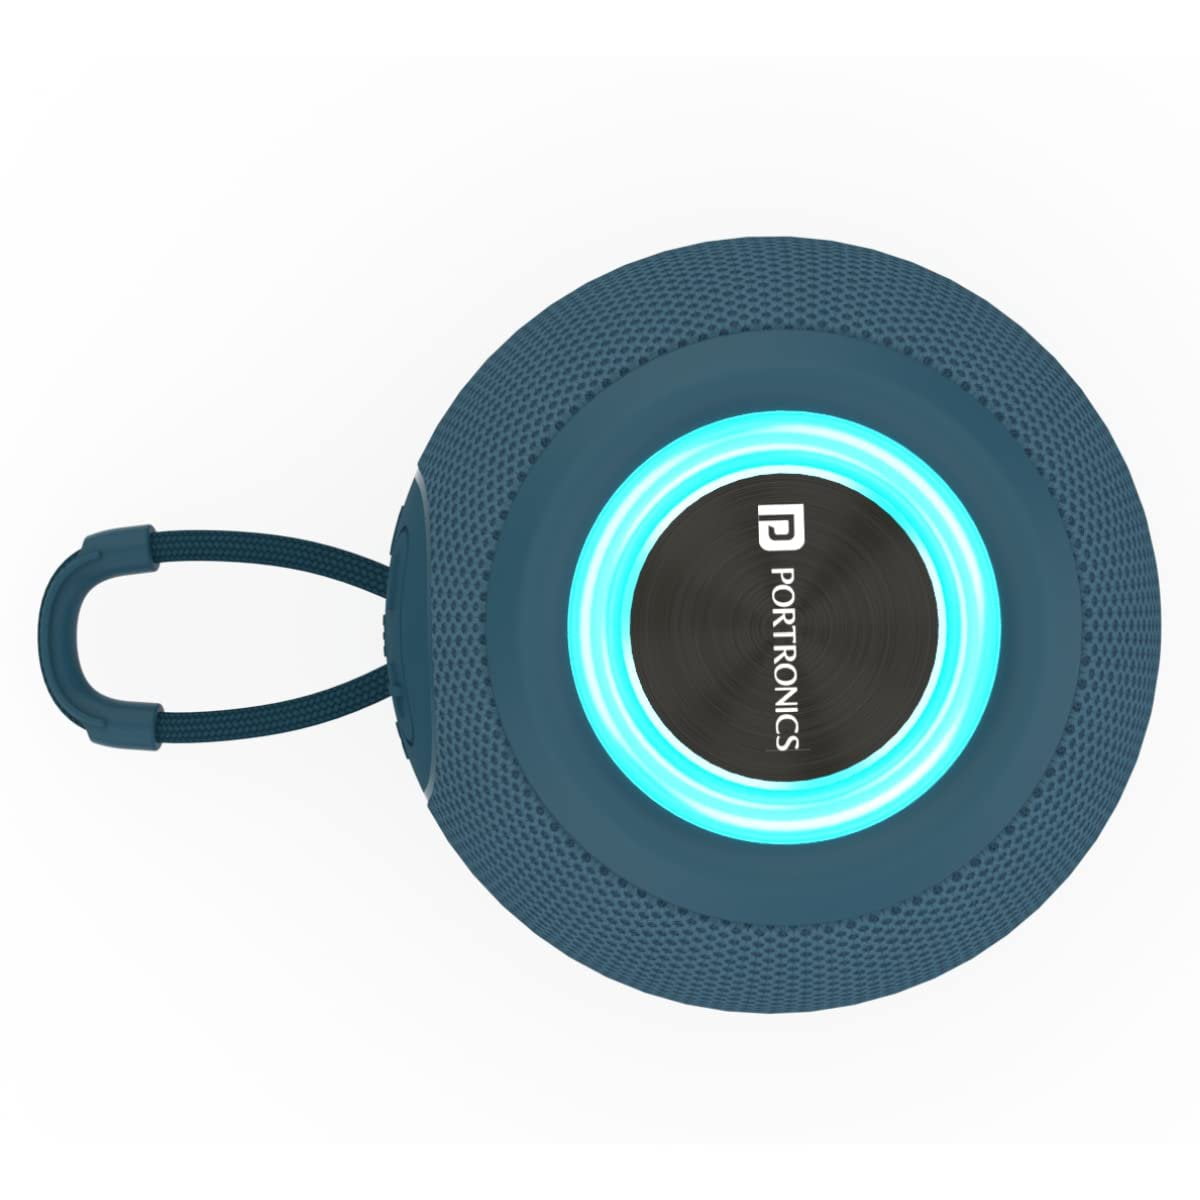 Portronics Resound Bluetooth Speaker 4 Shop Mobile Accessories Online in India